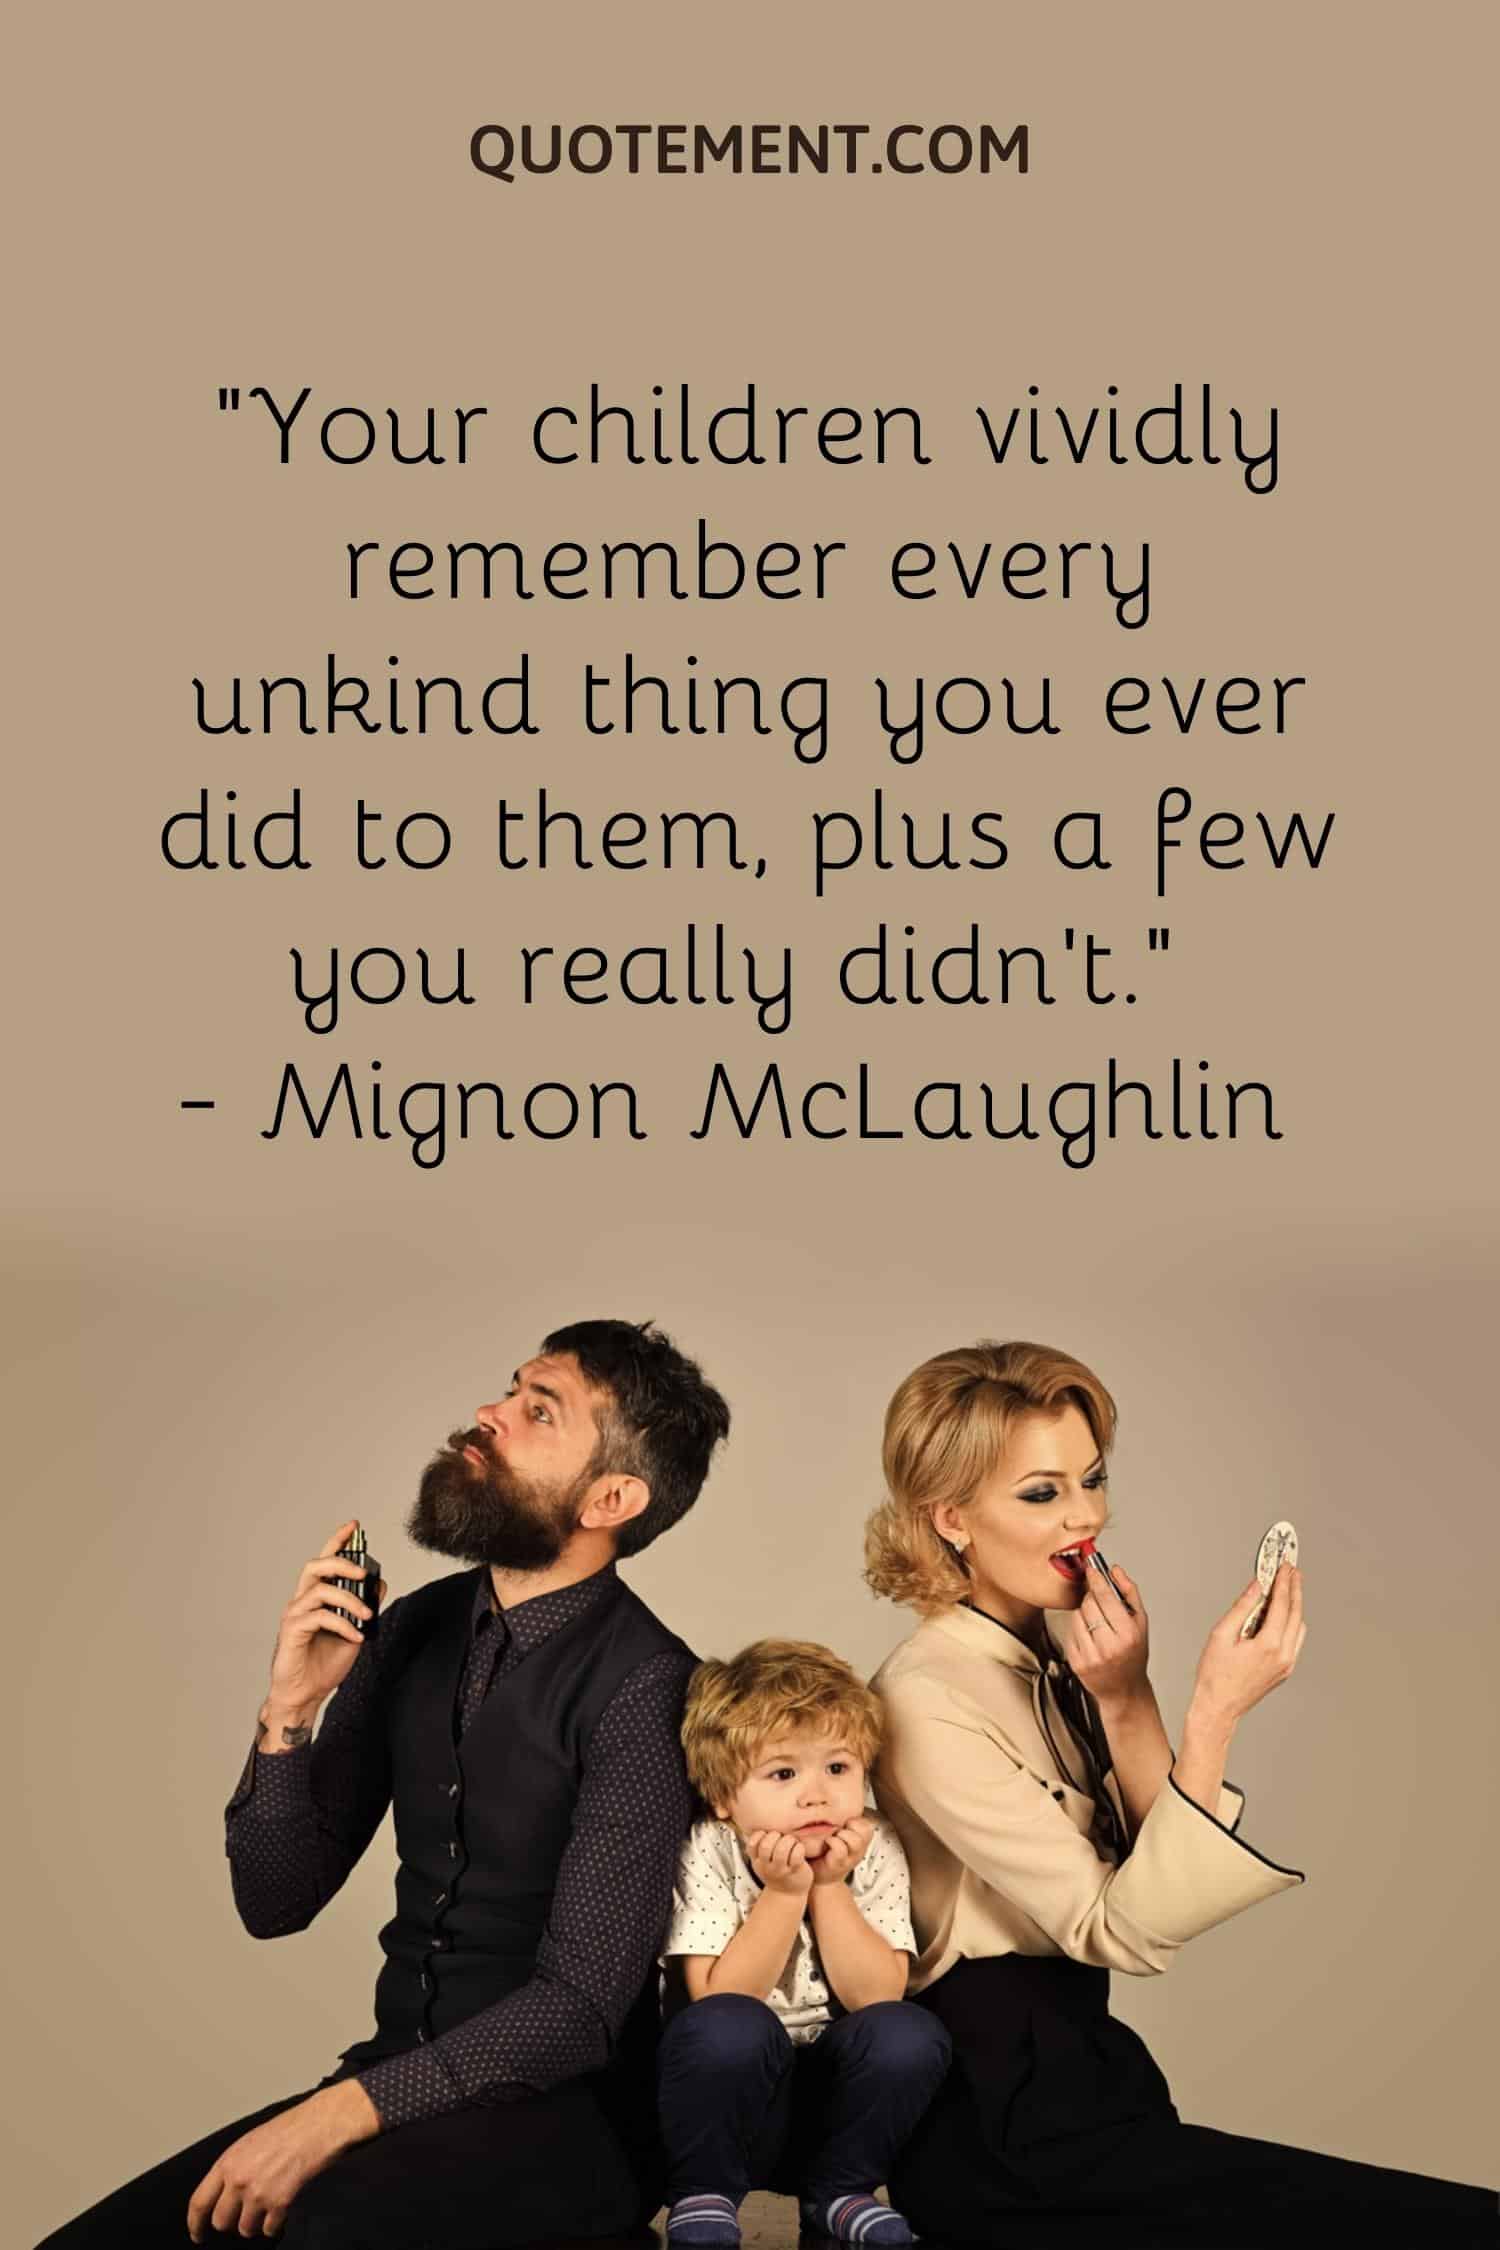 Your children vividly remember every unkind thing you ever did to them